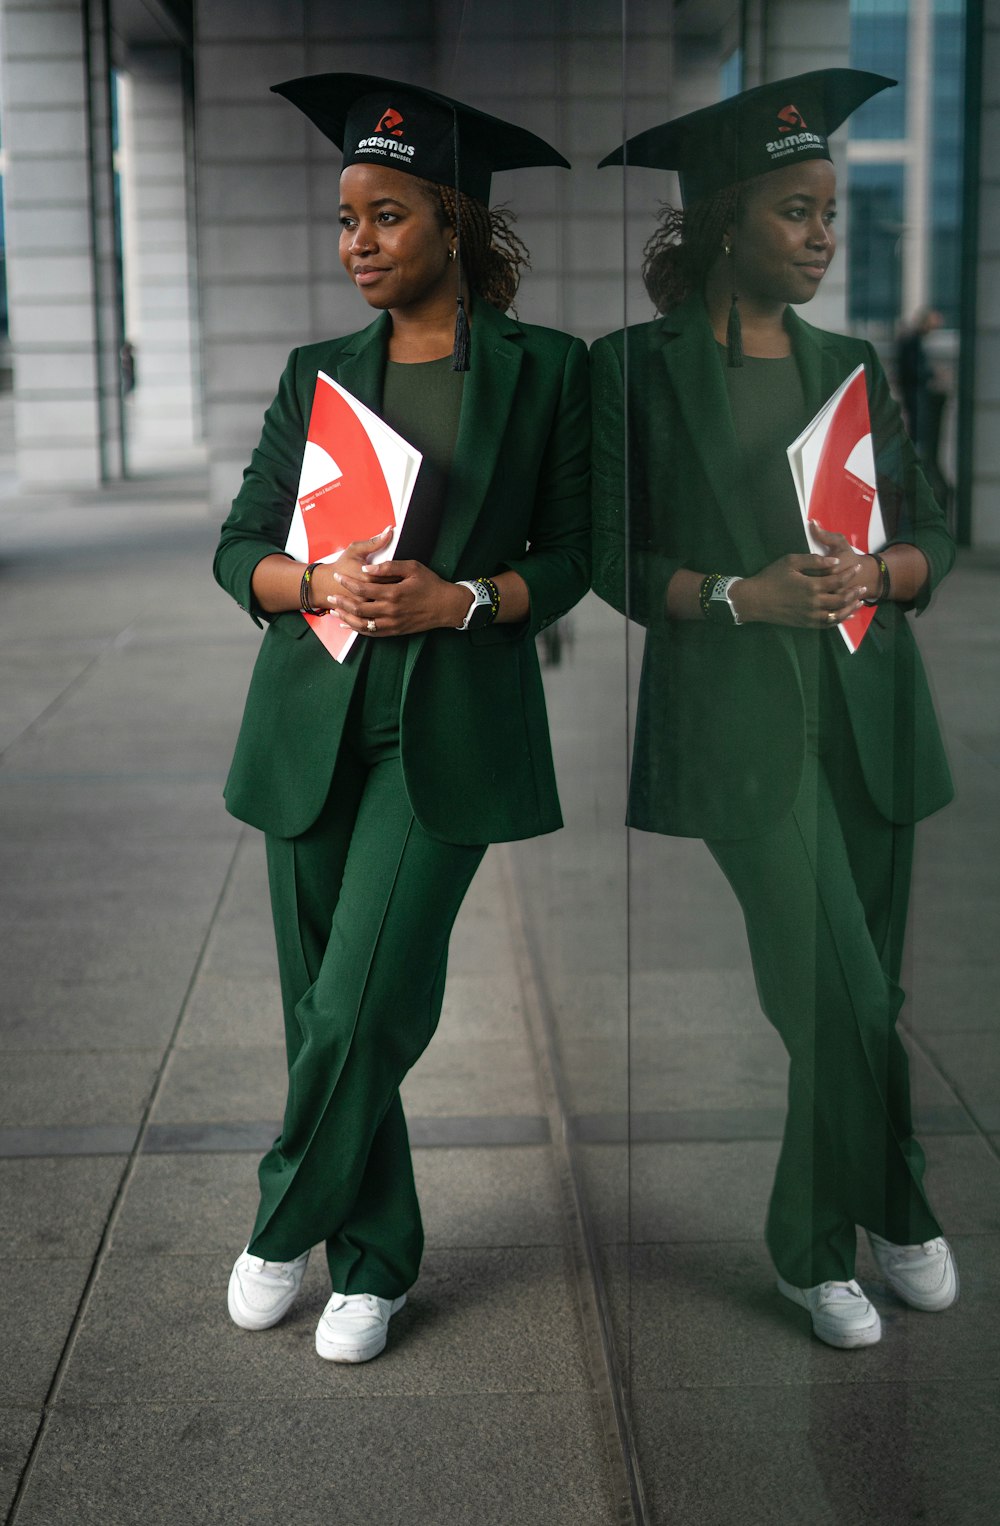 a couple of women in graduation gowns holding flags